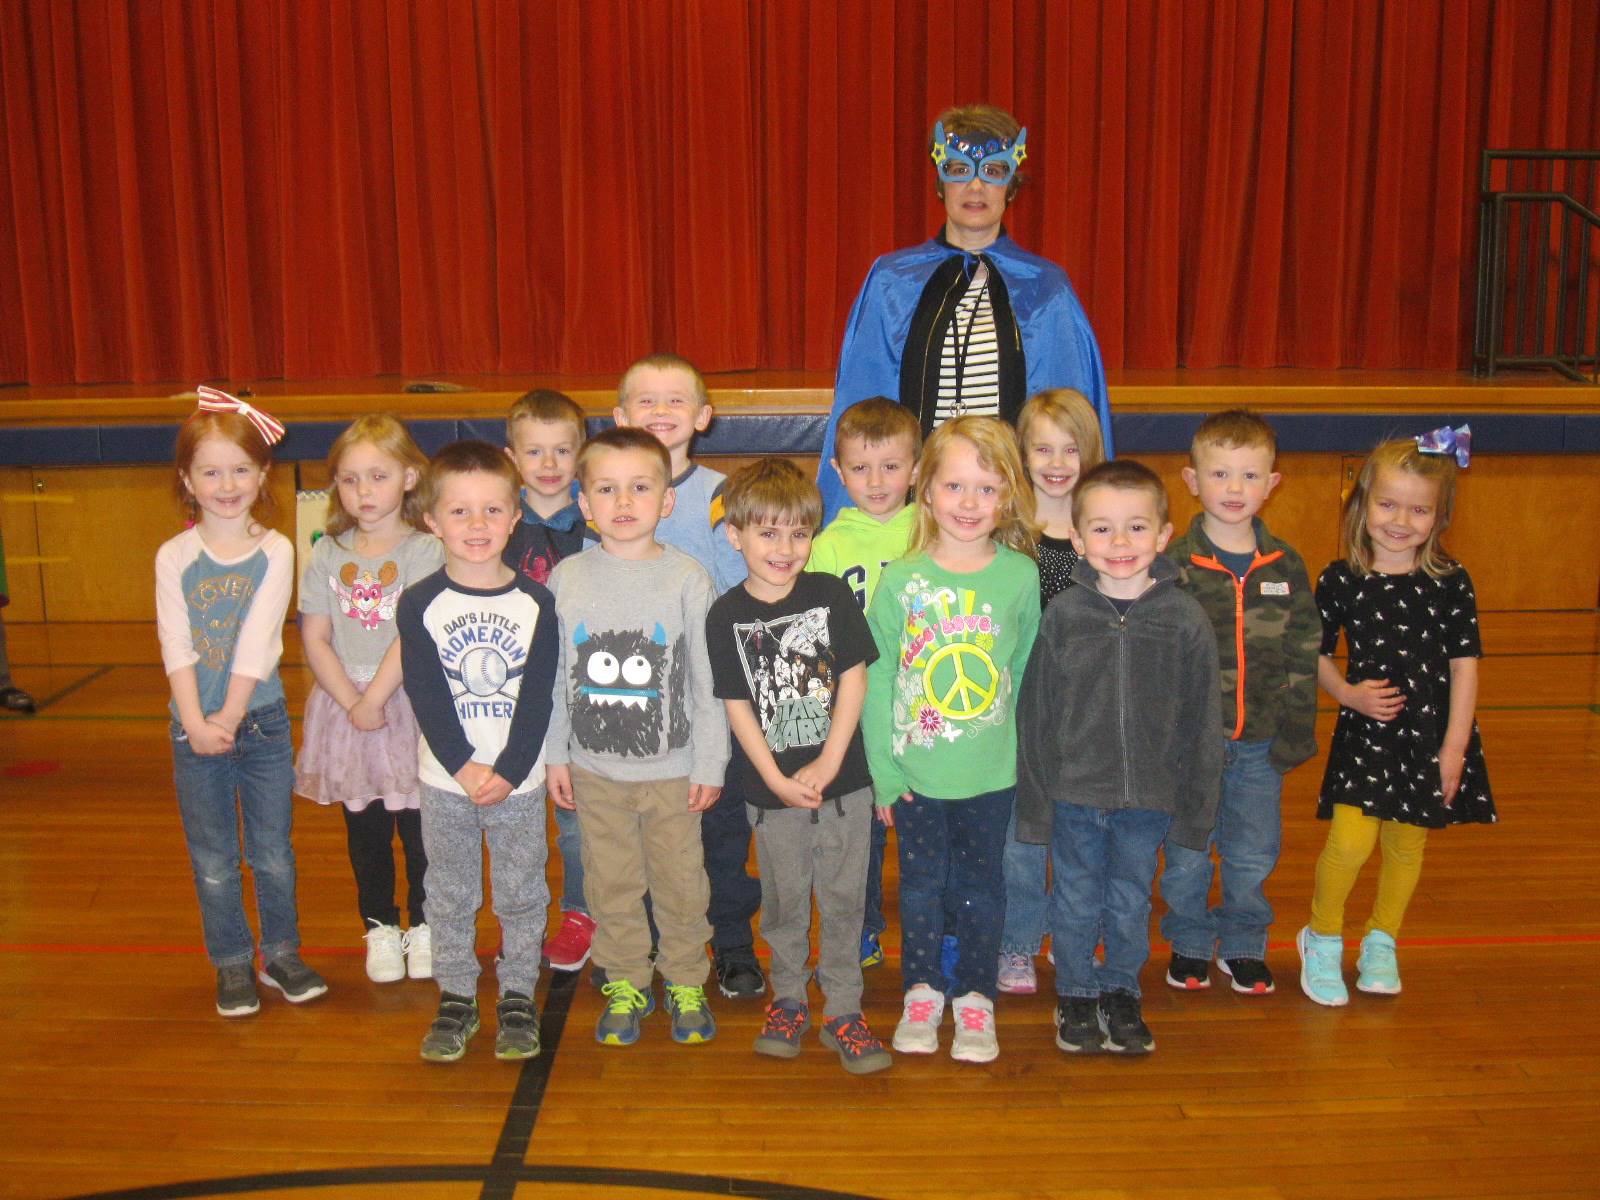 Personal Goal superhero with pre K students!